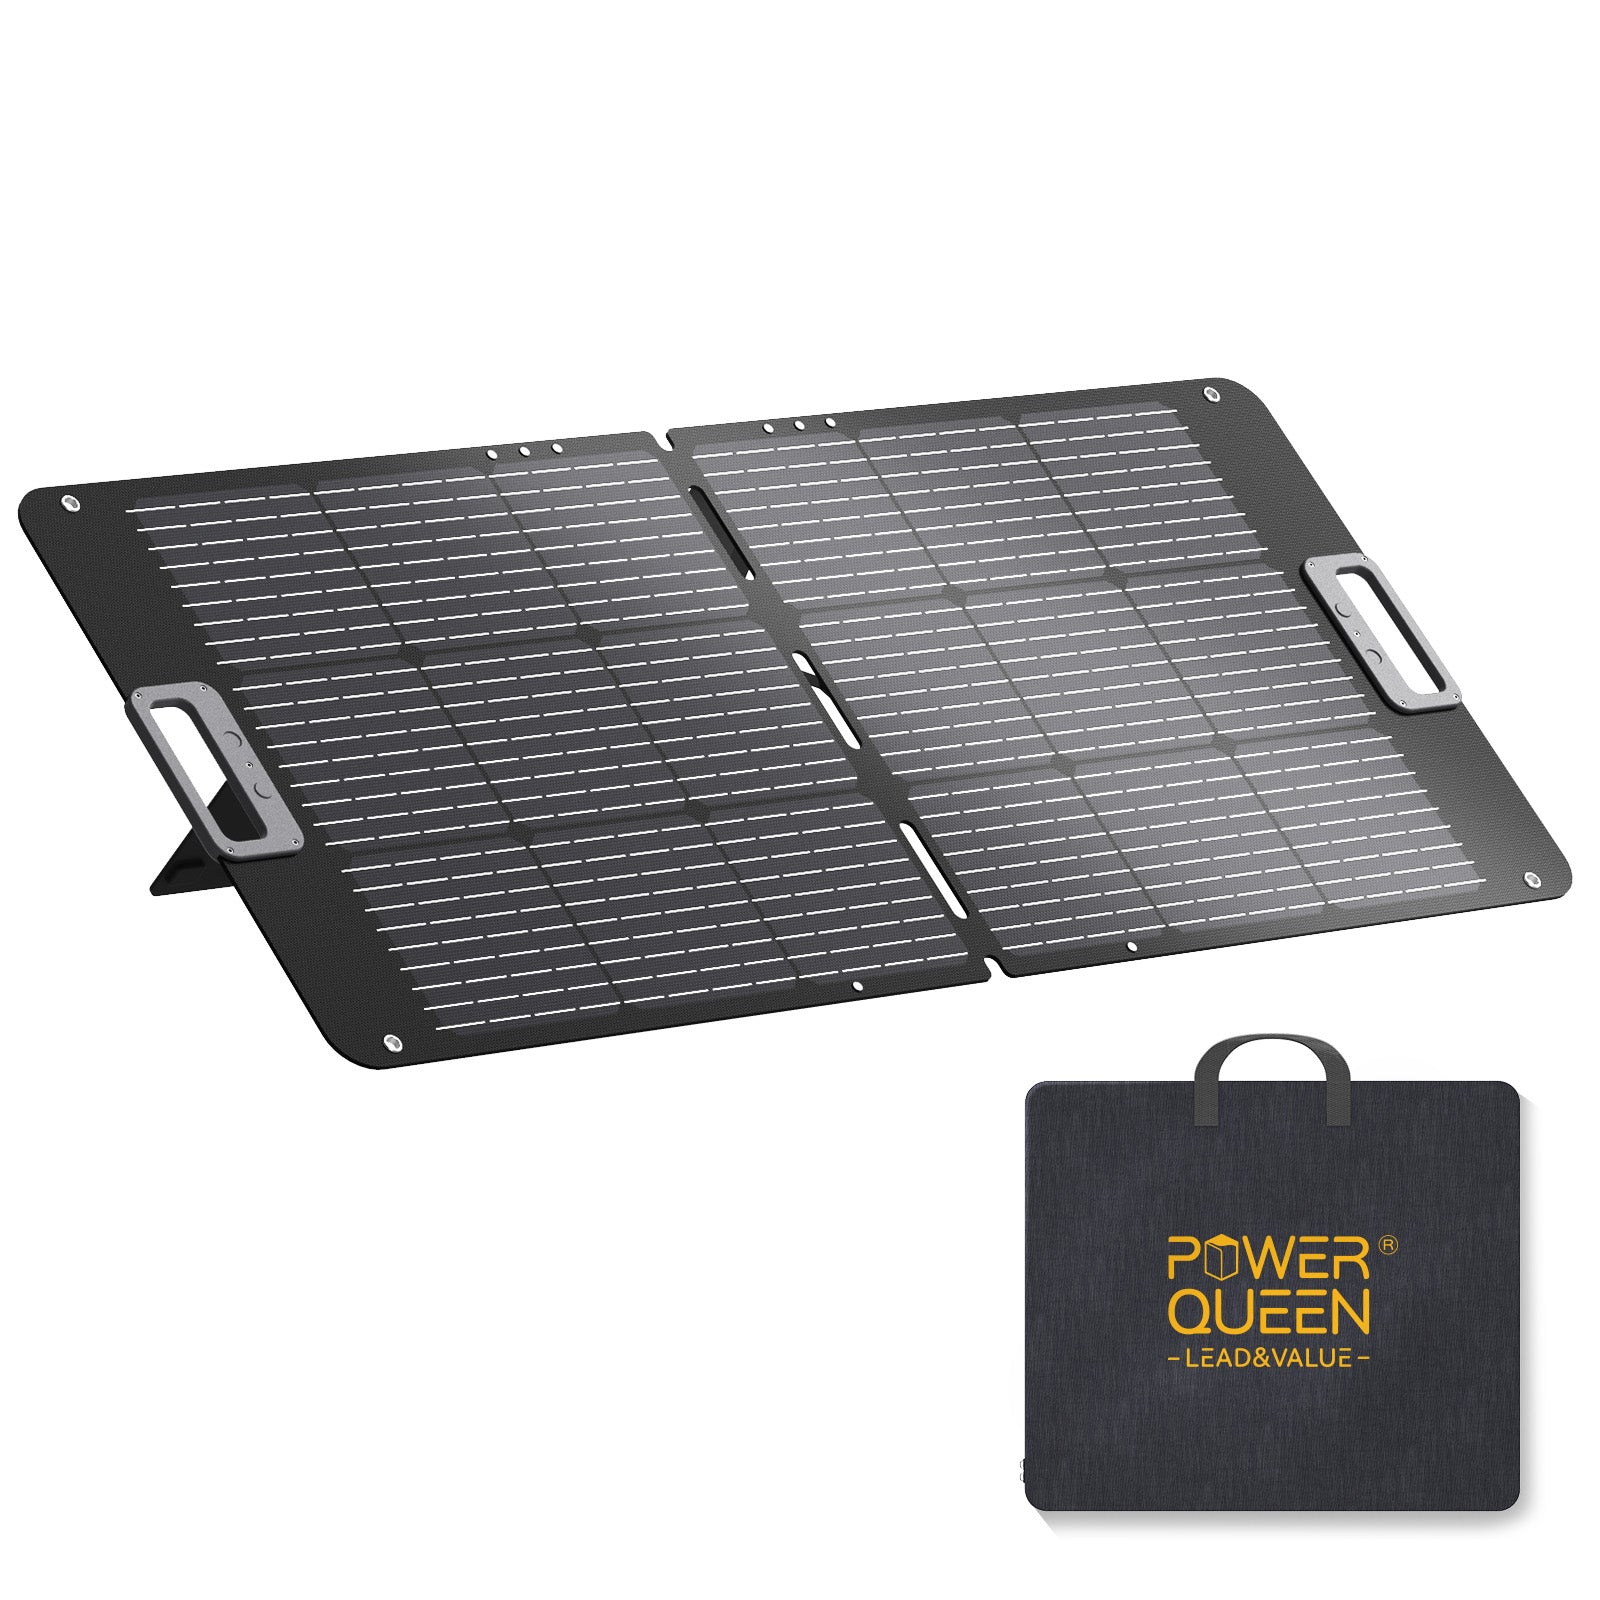 Power Queen 100W portable solar panel for P300 portable power station